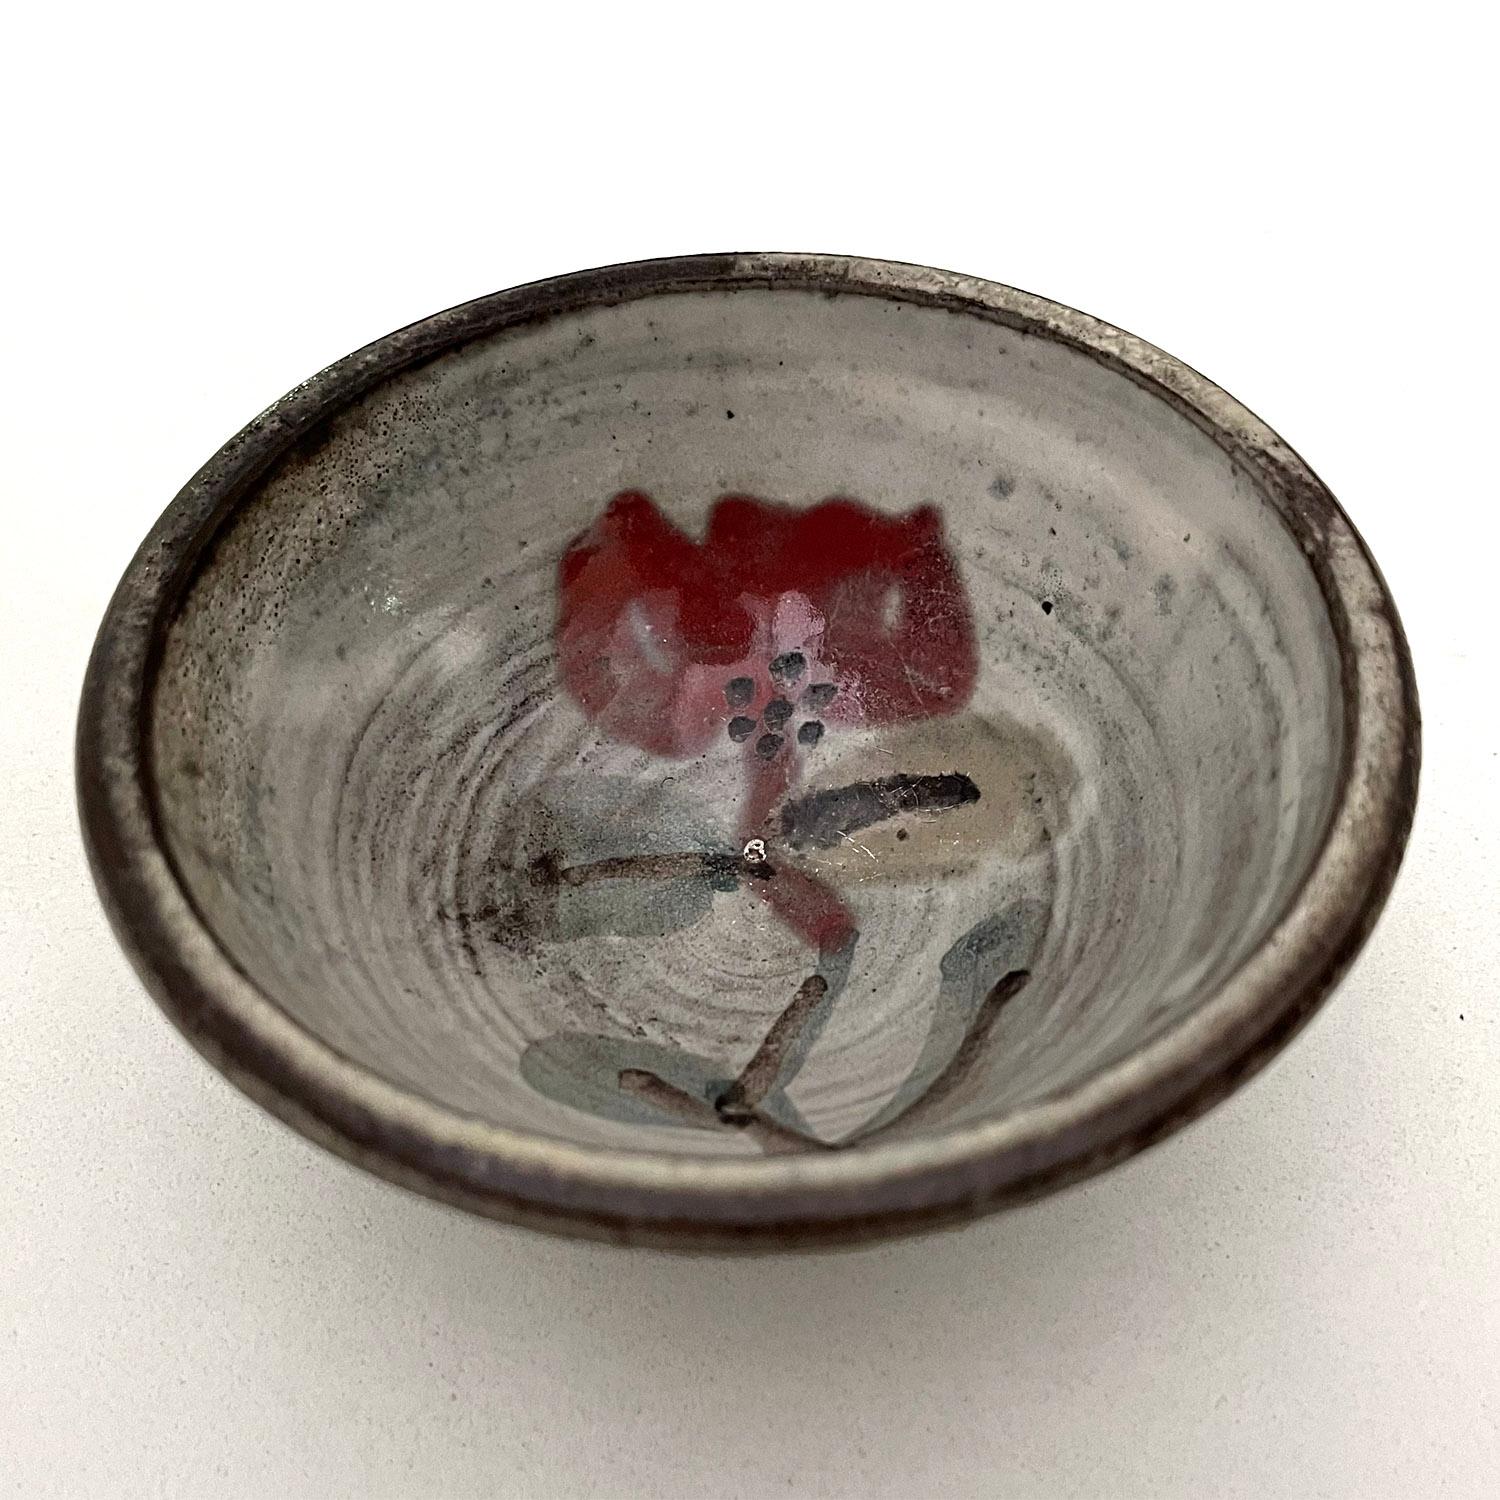 Gustave Reynaud earthenware vessel
Vallauris, France, circa 1960's
Organic composition and neutral palette 
Signature floral motif
This petite vessel beyond is precious
Perfect to use as a ring dish as it will brighten up any surface
Patina from age